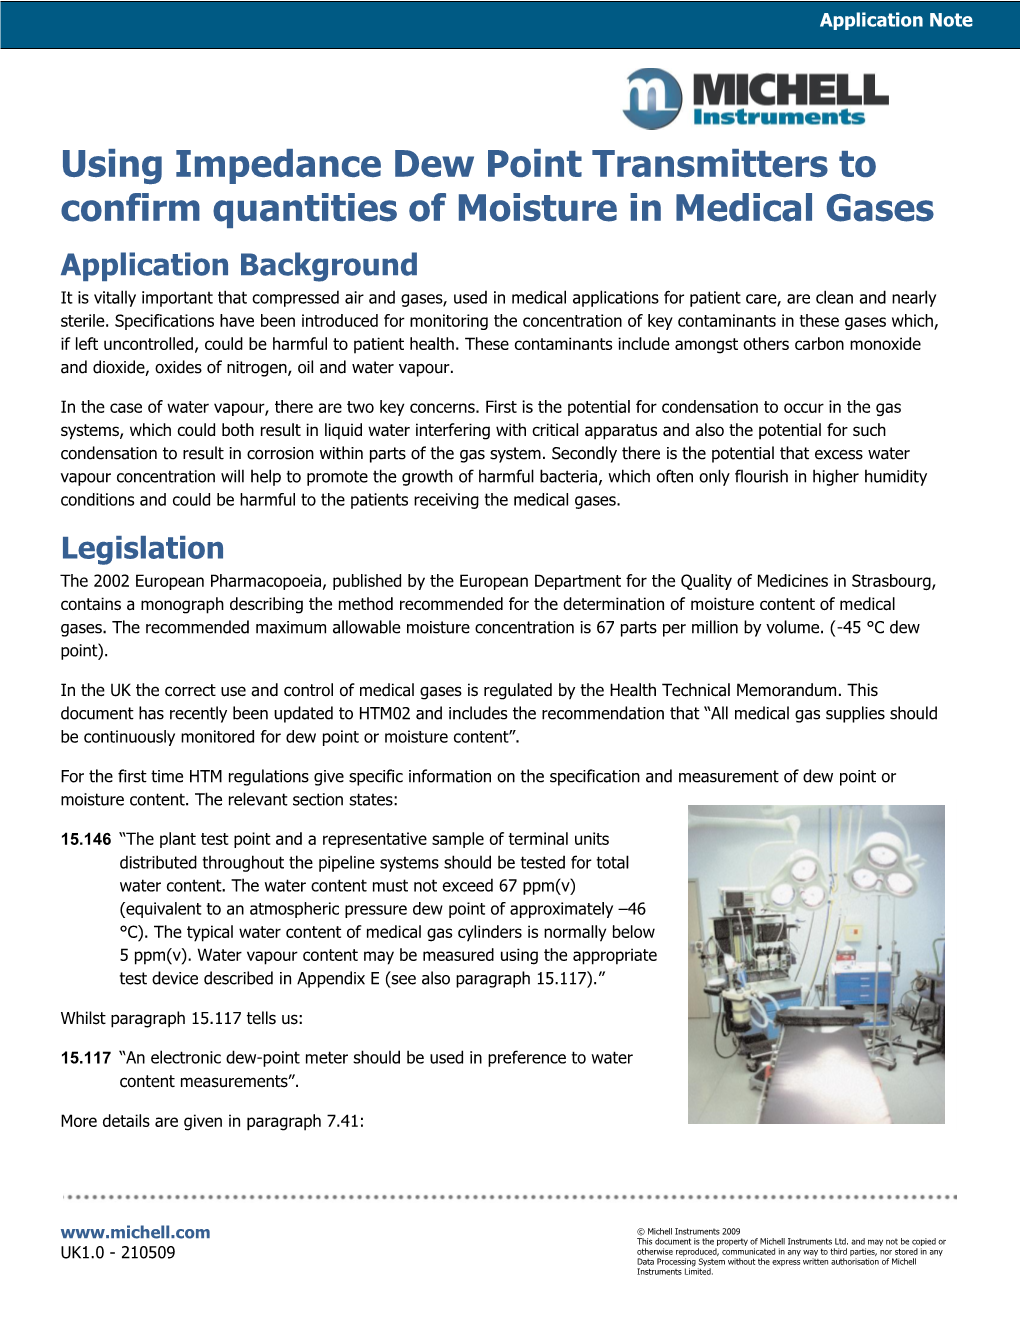 Using Impedance Dew Point Transmitters to Confirm Quantities of Moisture in Medical Gases